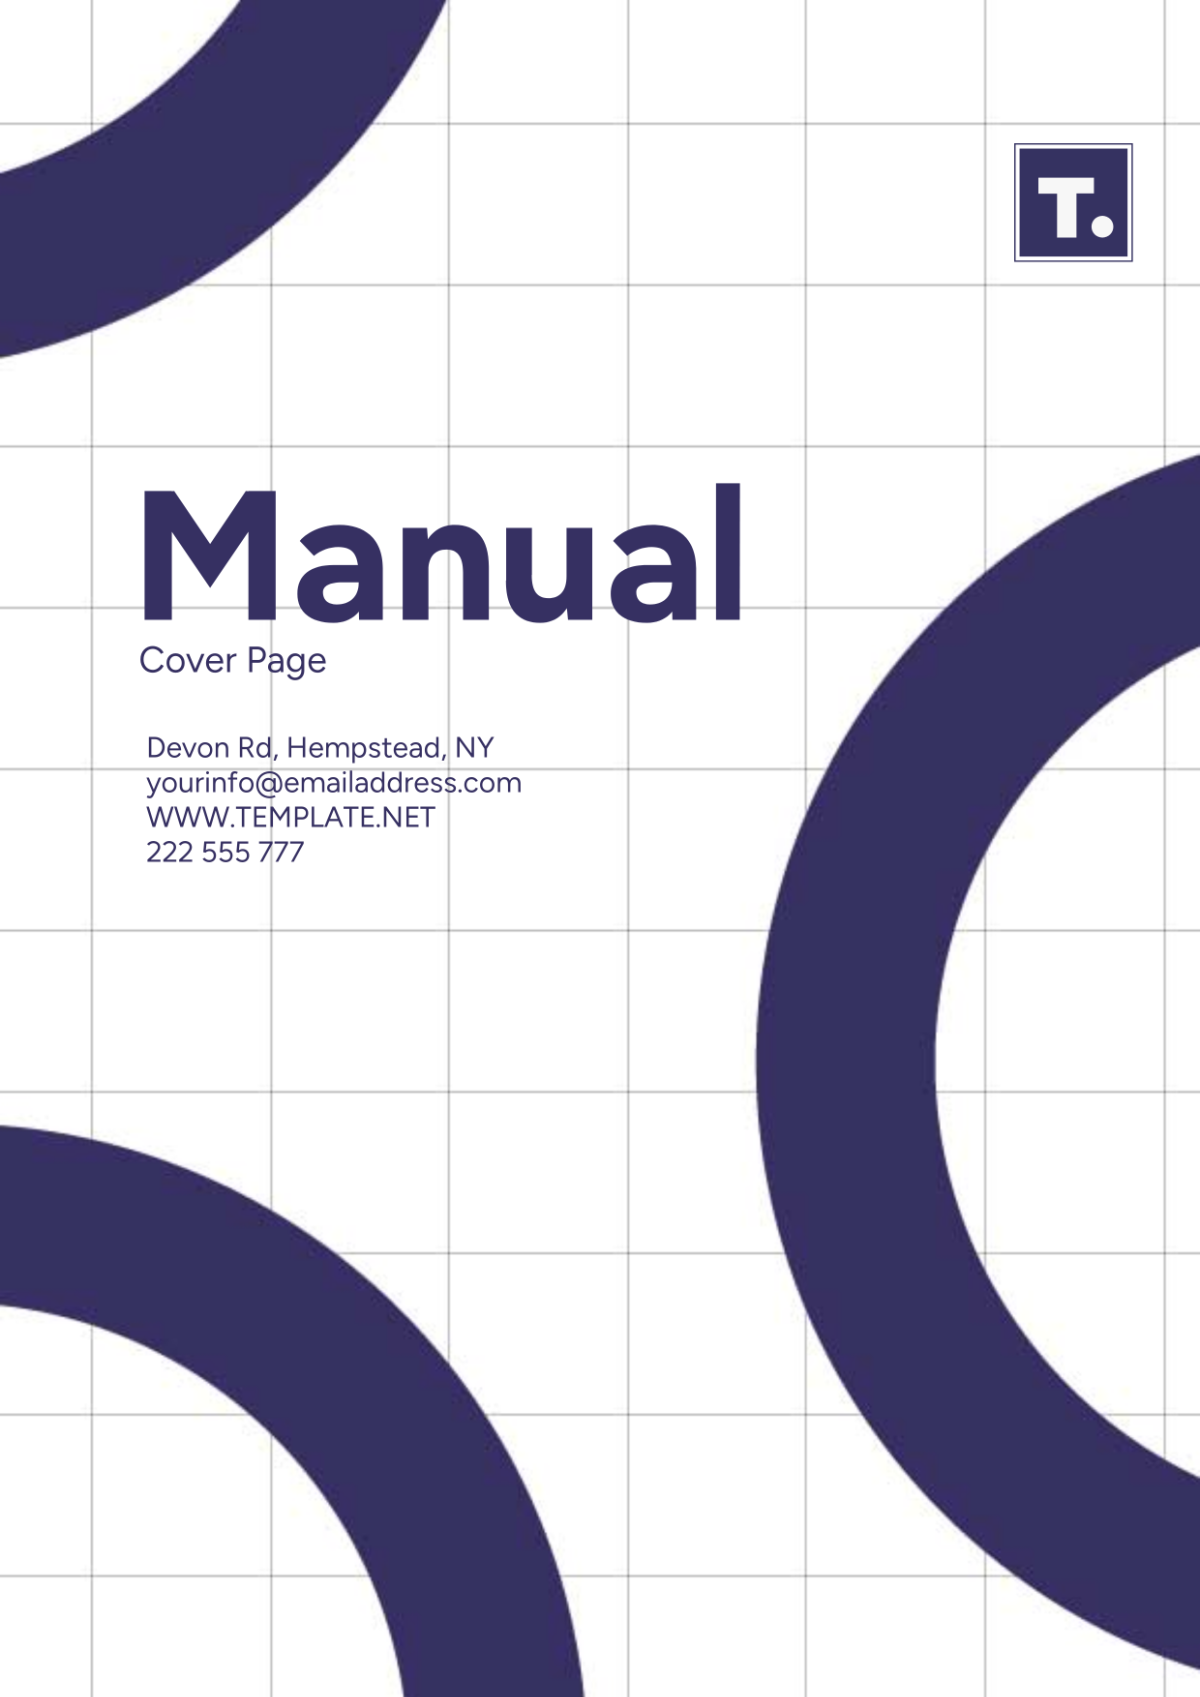 Manual Cover Page